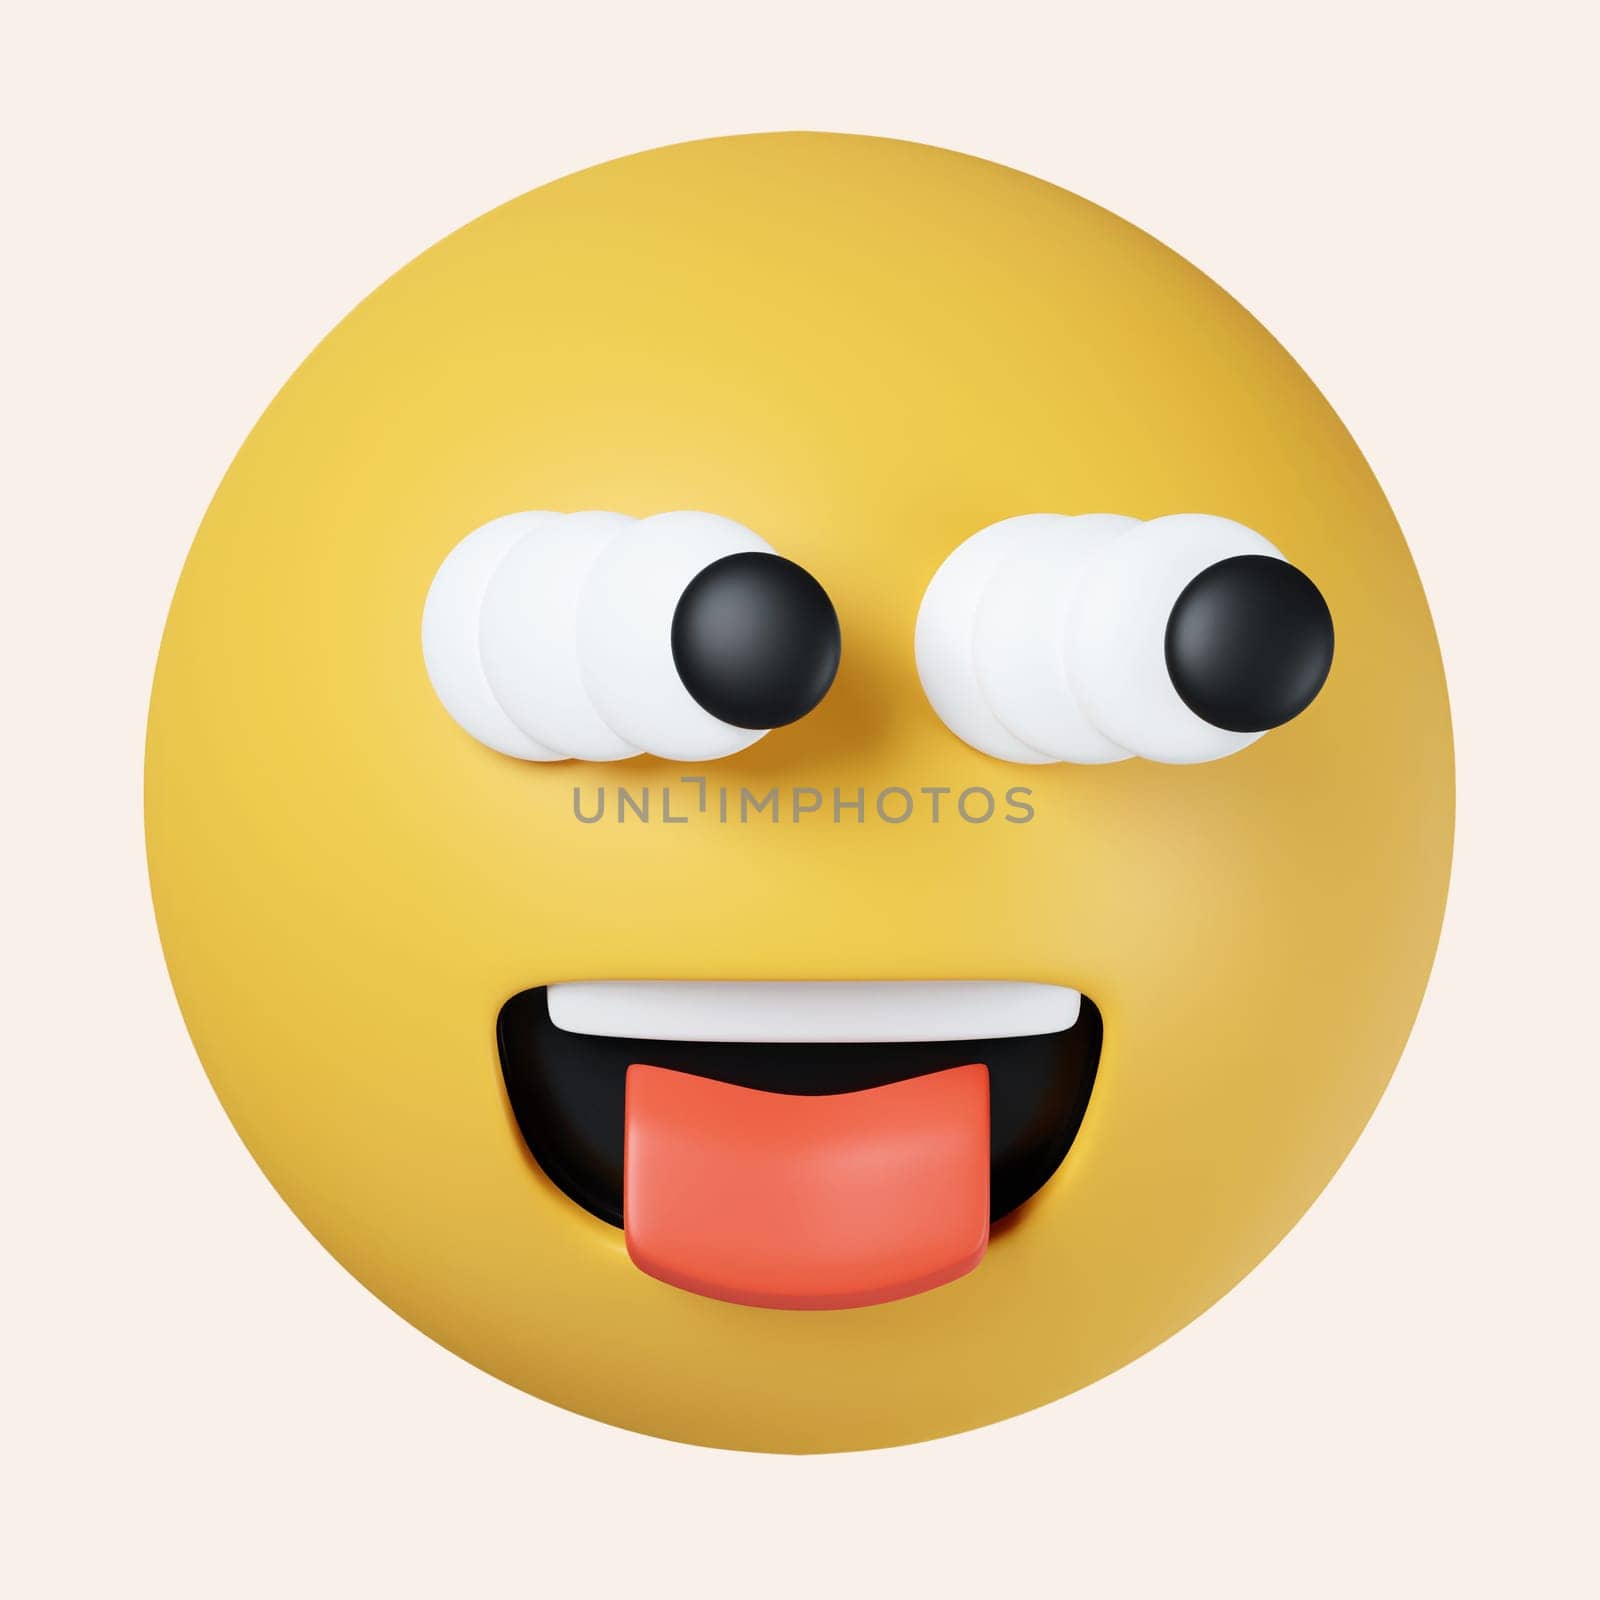 3d Goofy emoticon with crazy eyes and tongue out. Yellow face emoji. icon isolated on gray background. 3d rendering illustration. Clipping path. by meepiangraphic